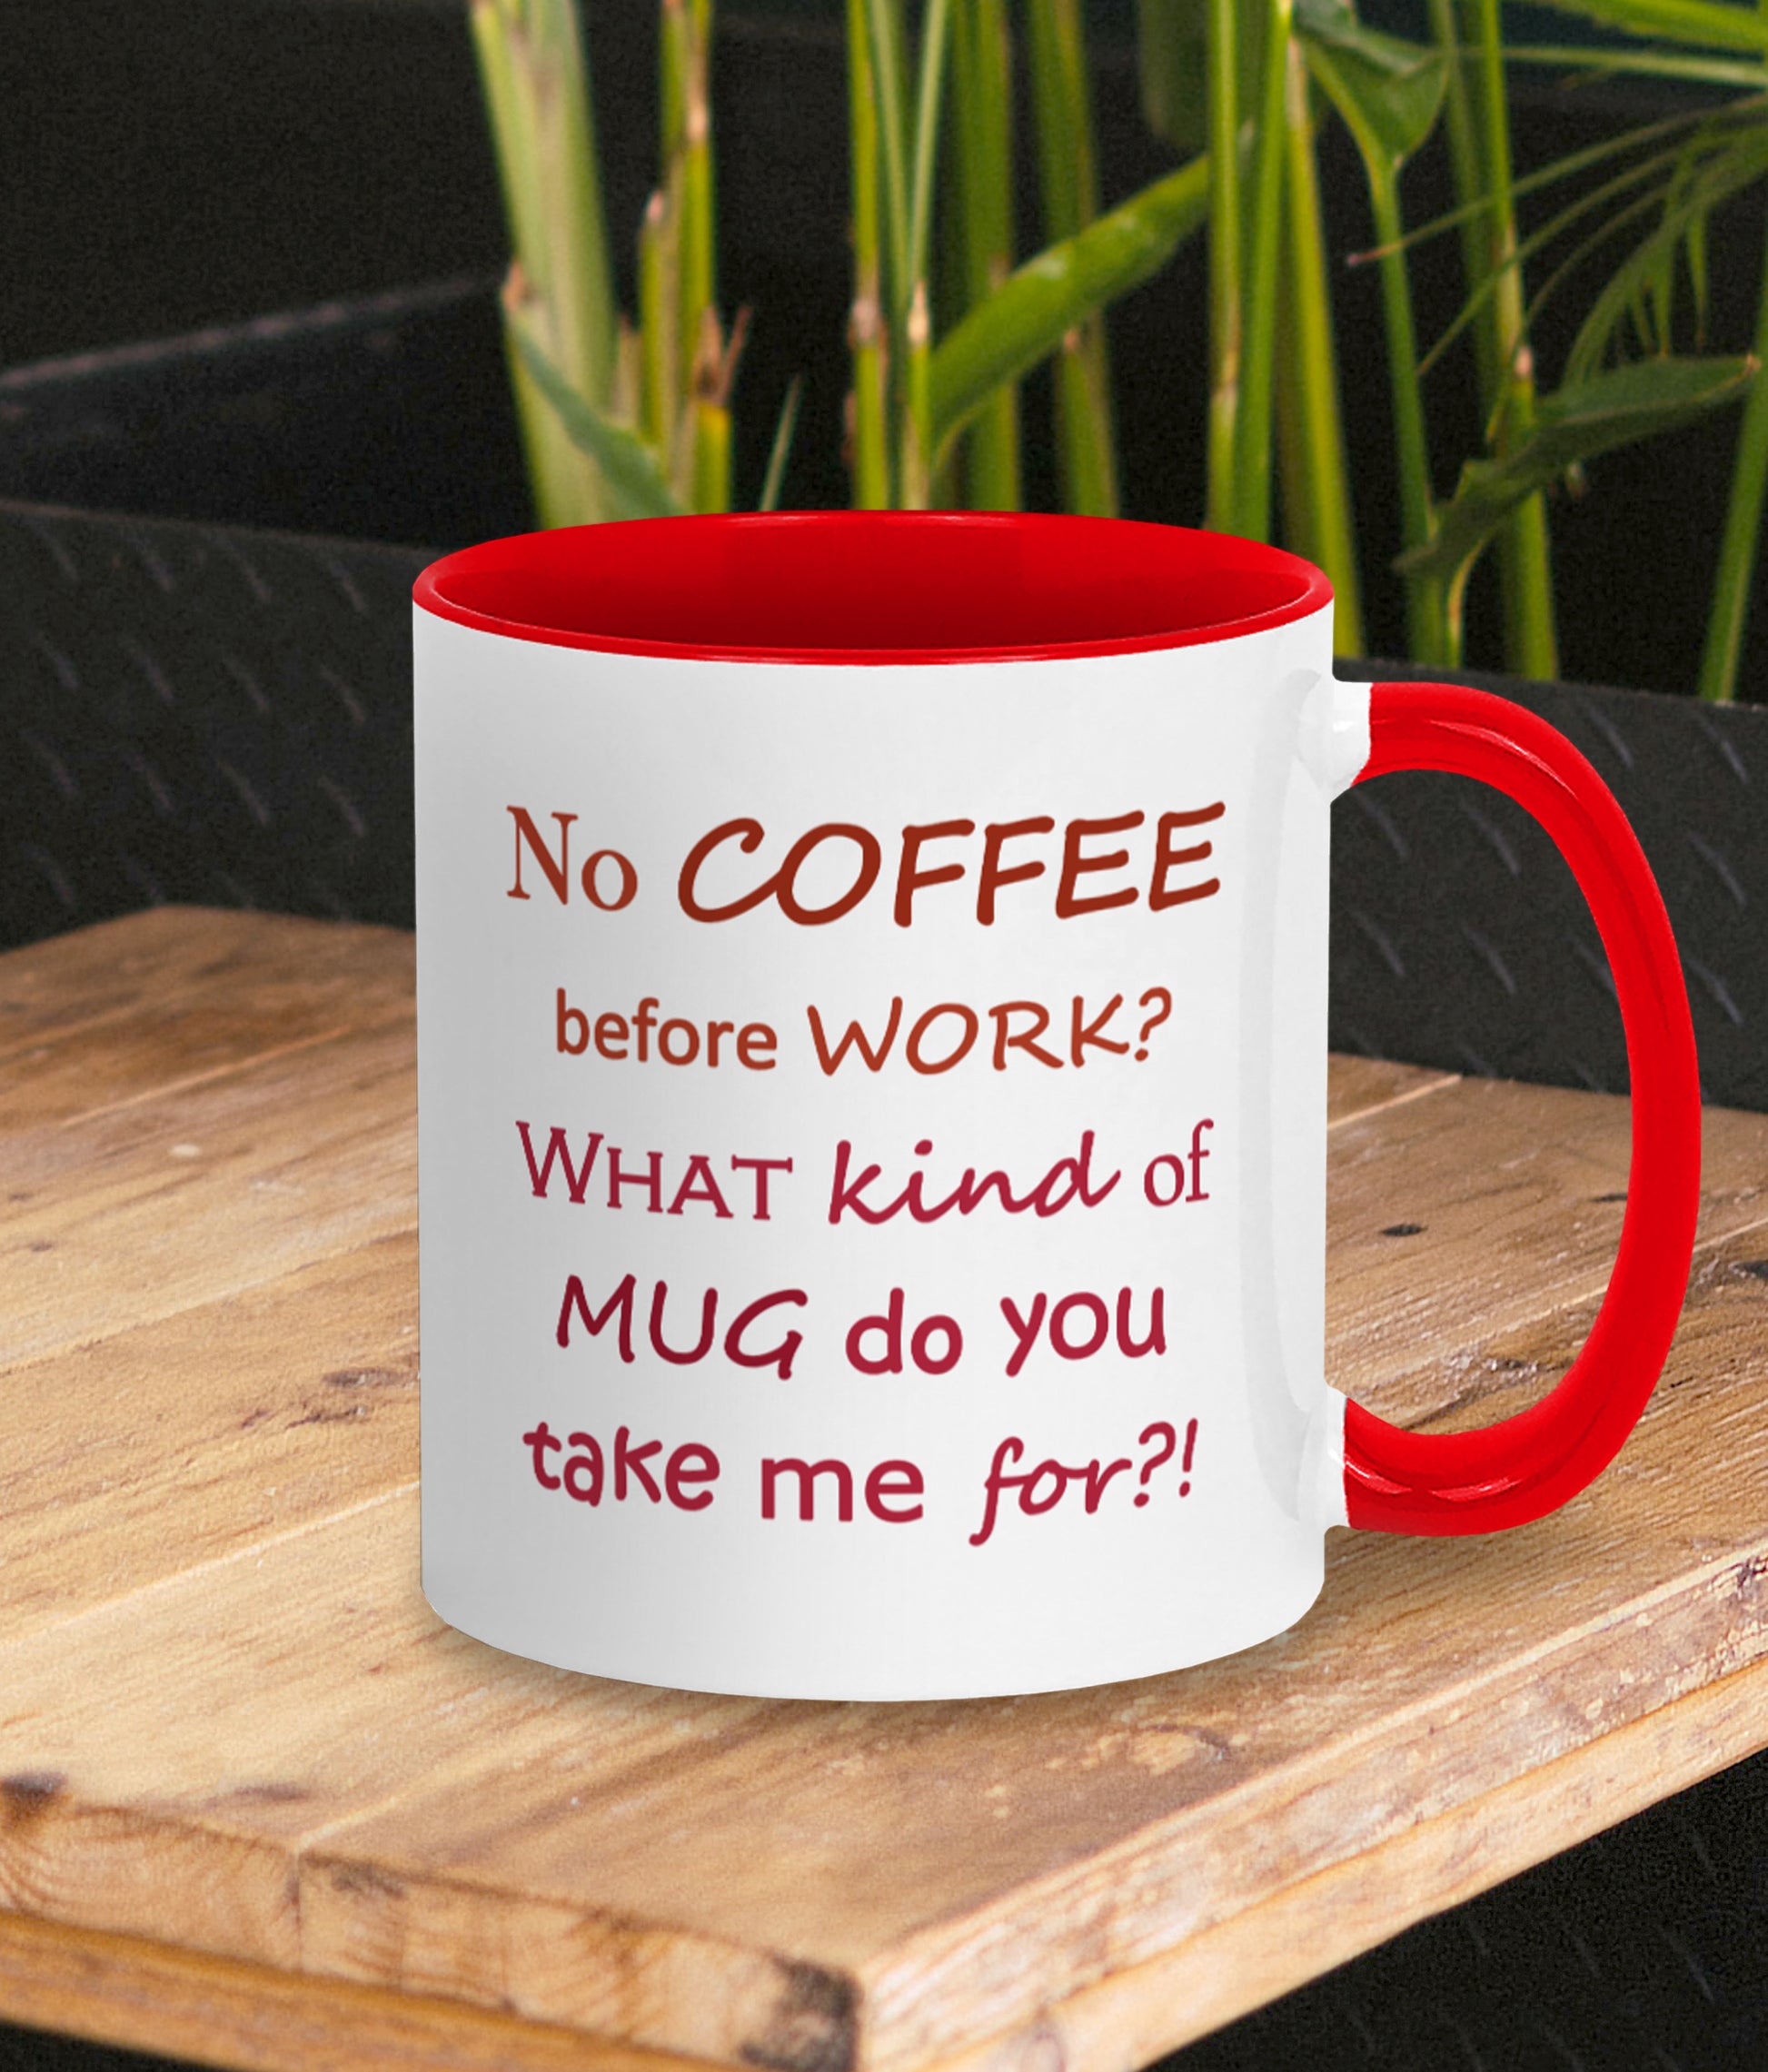 Funny mug for work. Gift for coffee lover and work bestie. White mug with red inner and handle. Two tone red text on mug reads humorous words No COFFEE before WORK? WHAT kind of MUG do you take me for?!